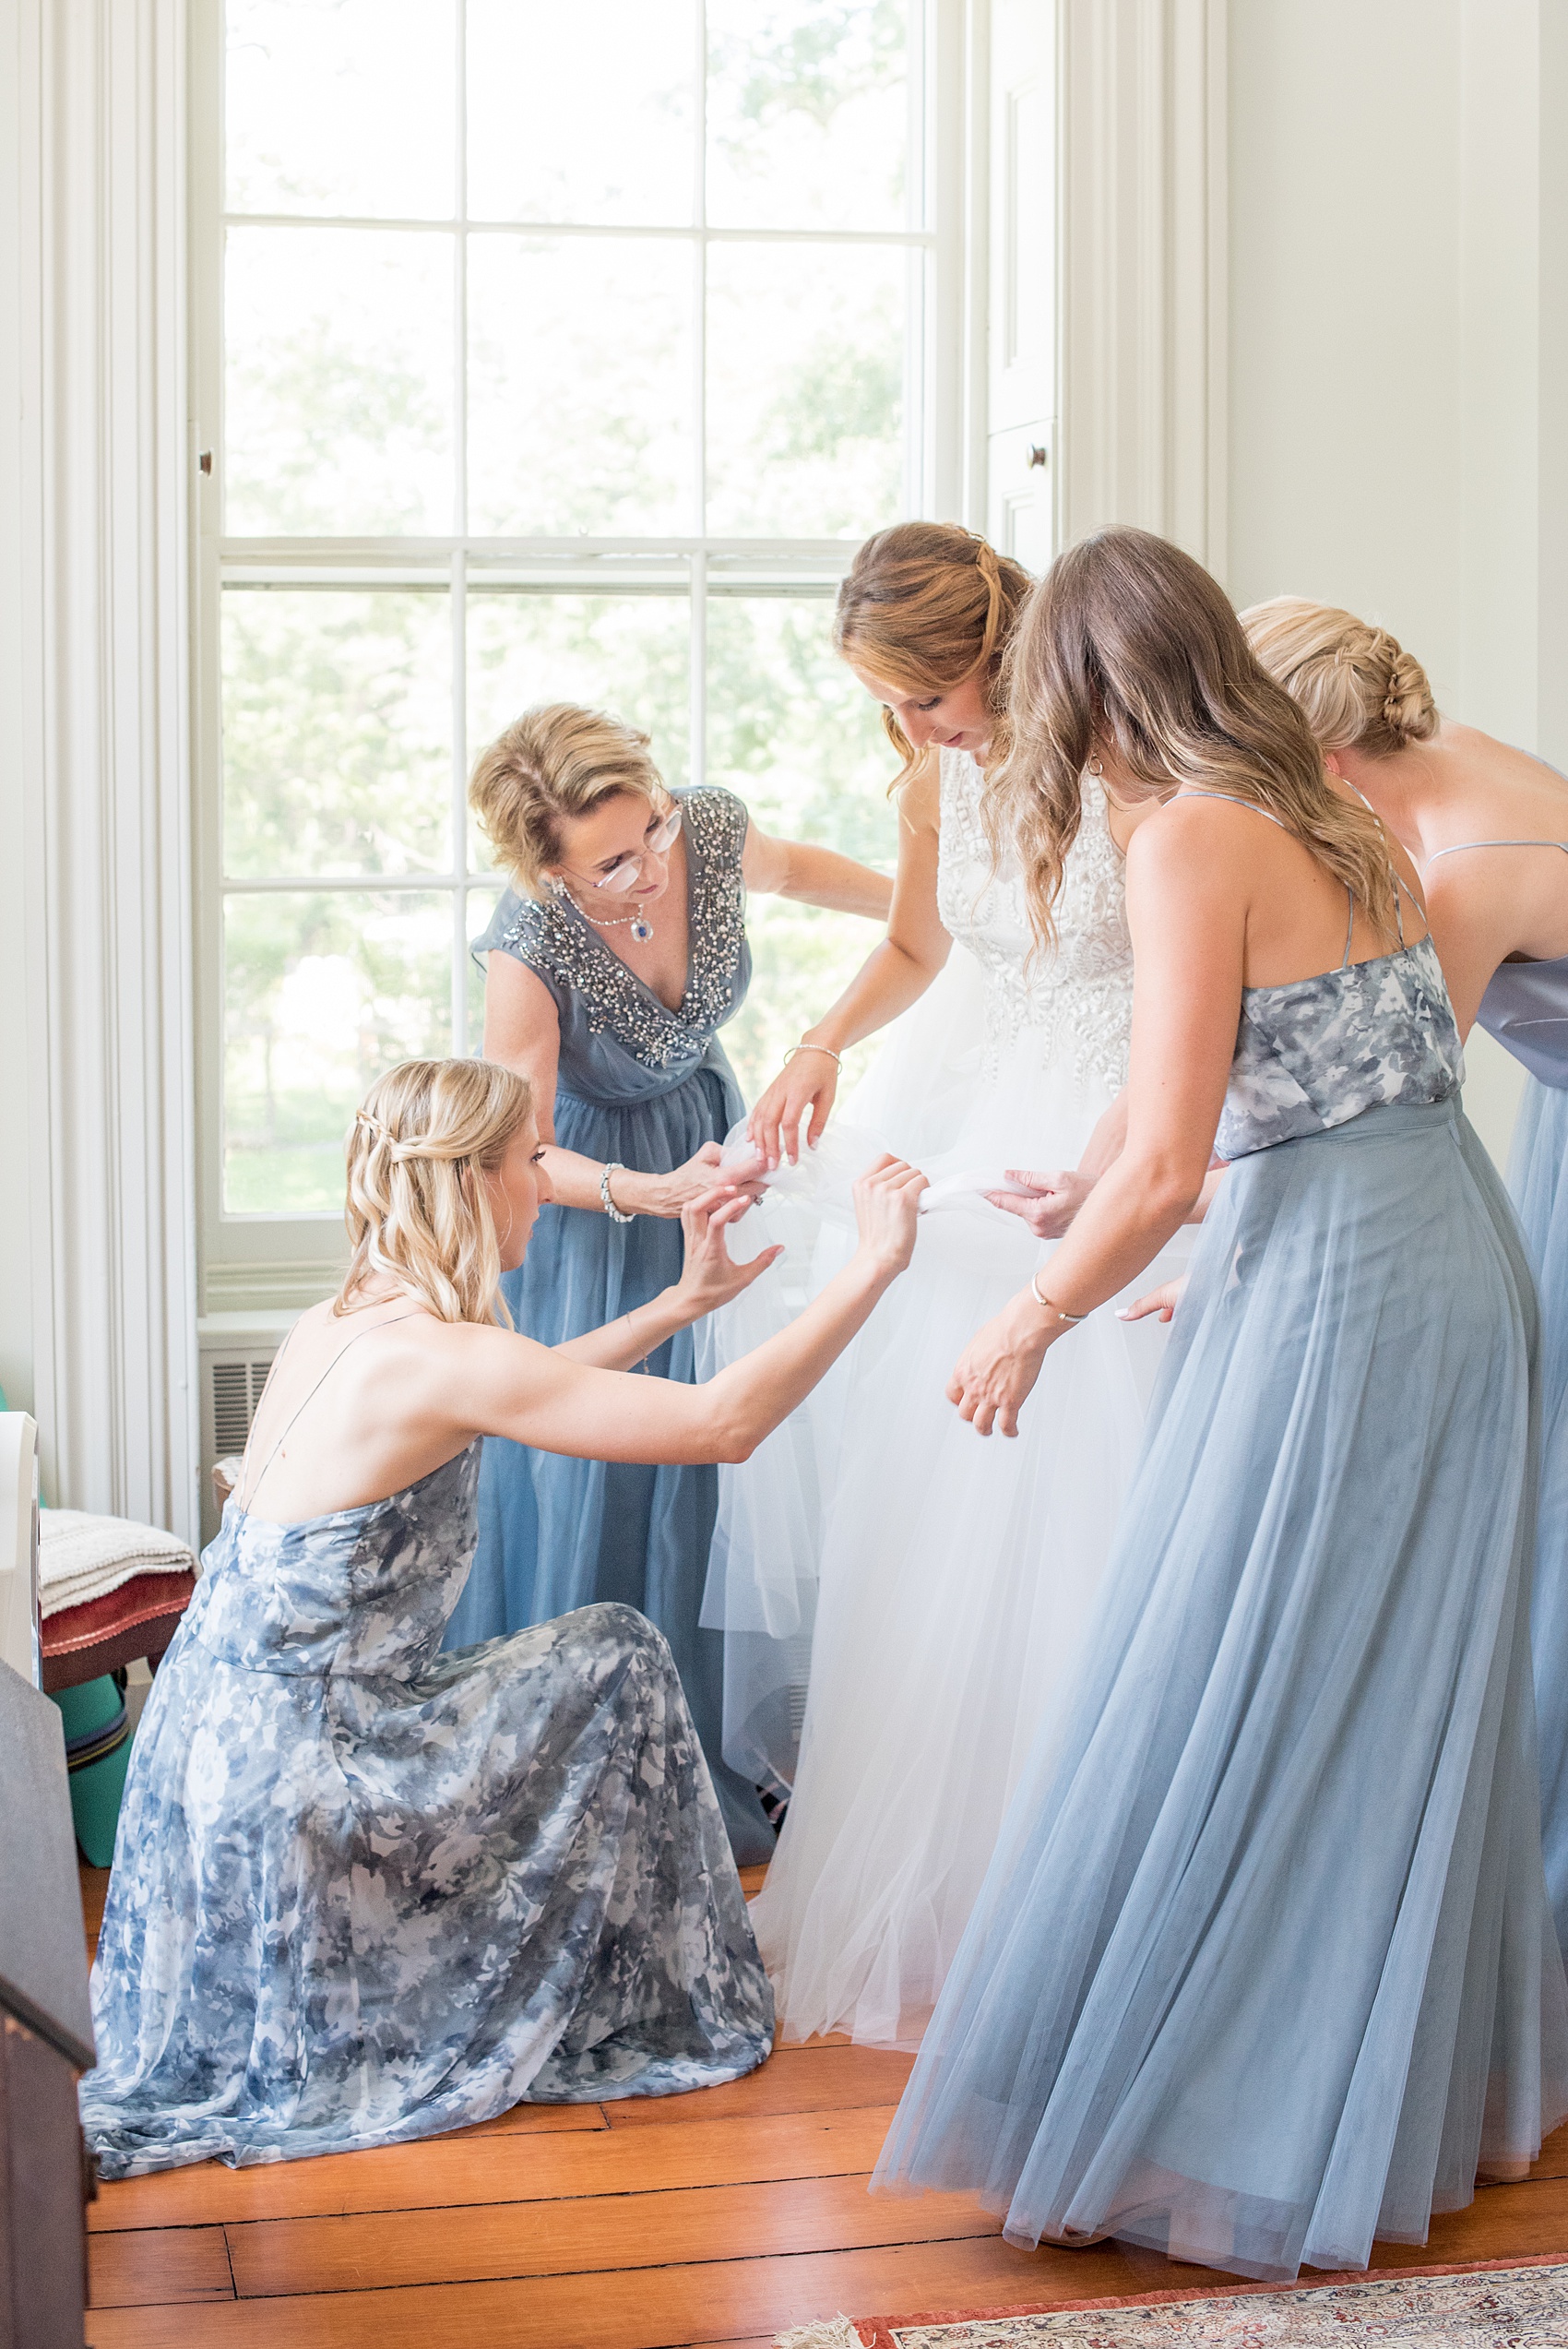 Mikkel Paige Photography photos from a Southwood Estate Wedding in Germantown, New York in the Hudson Valley. Picture of the bridesmaids helping the bride get ready in the historic home.